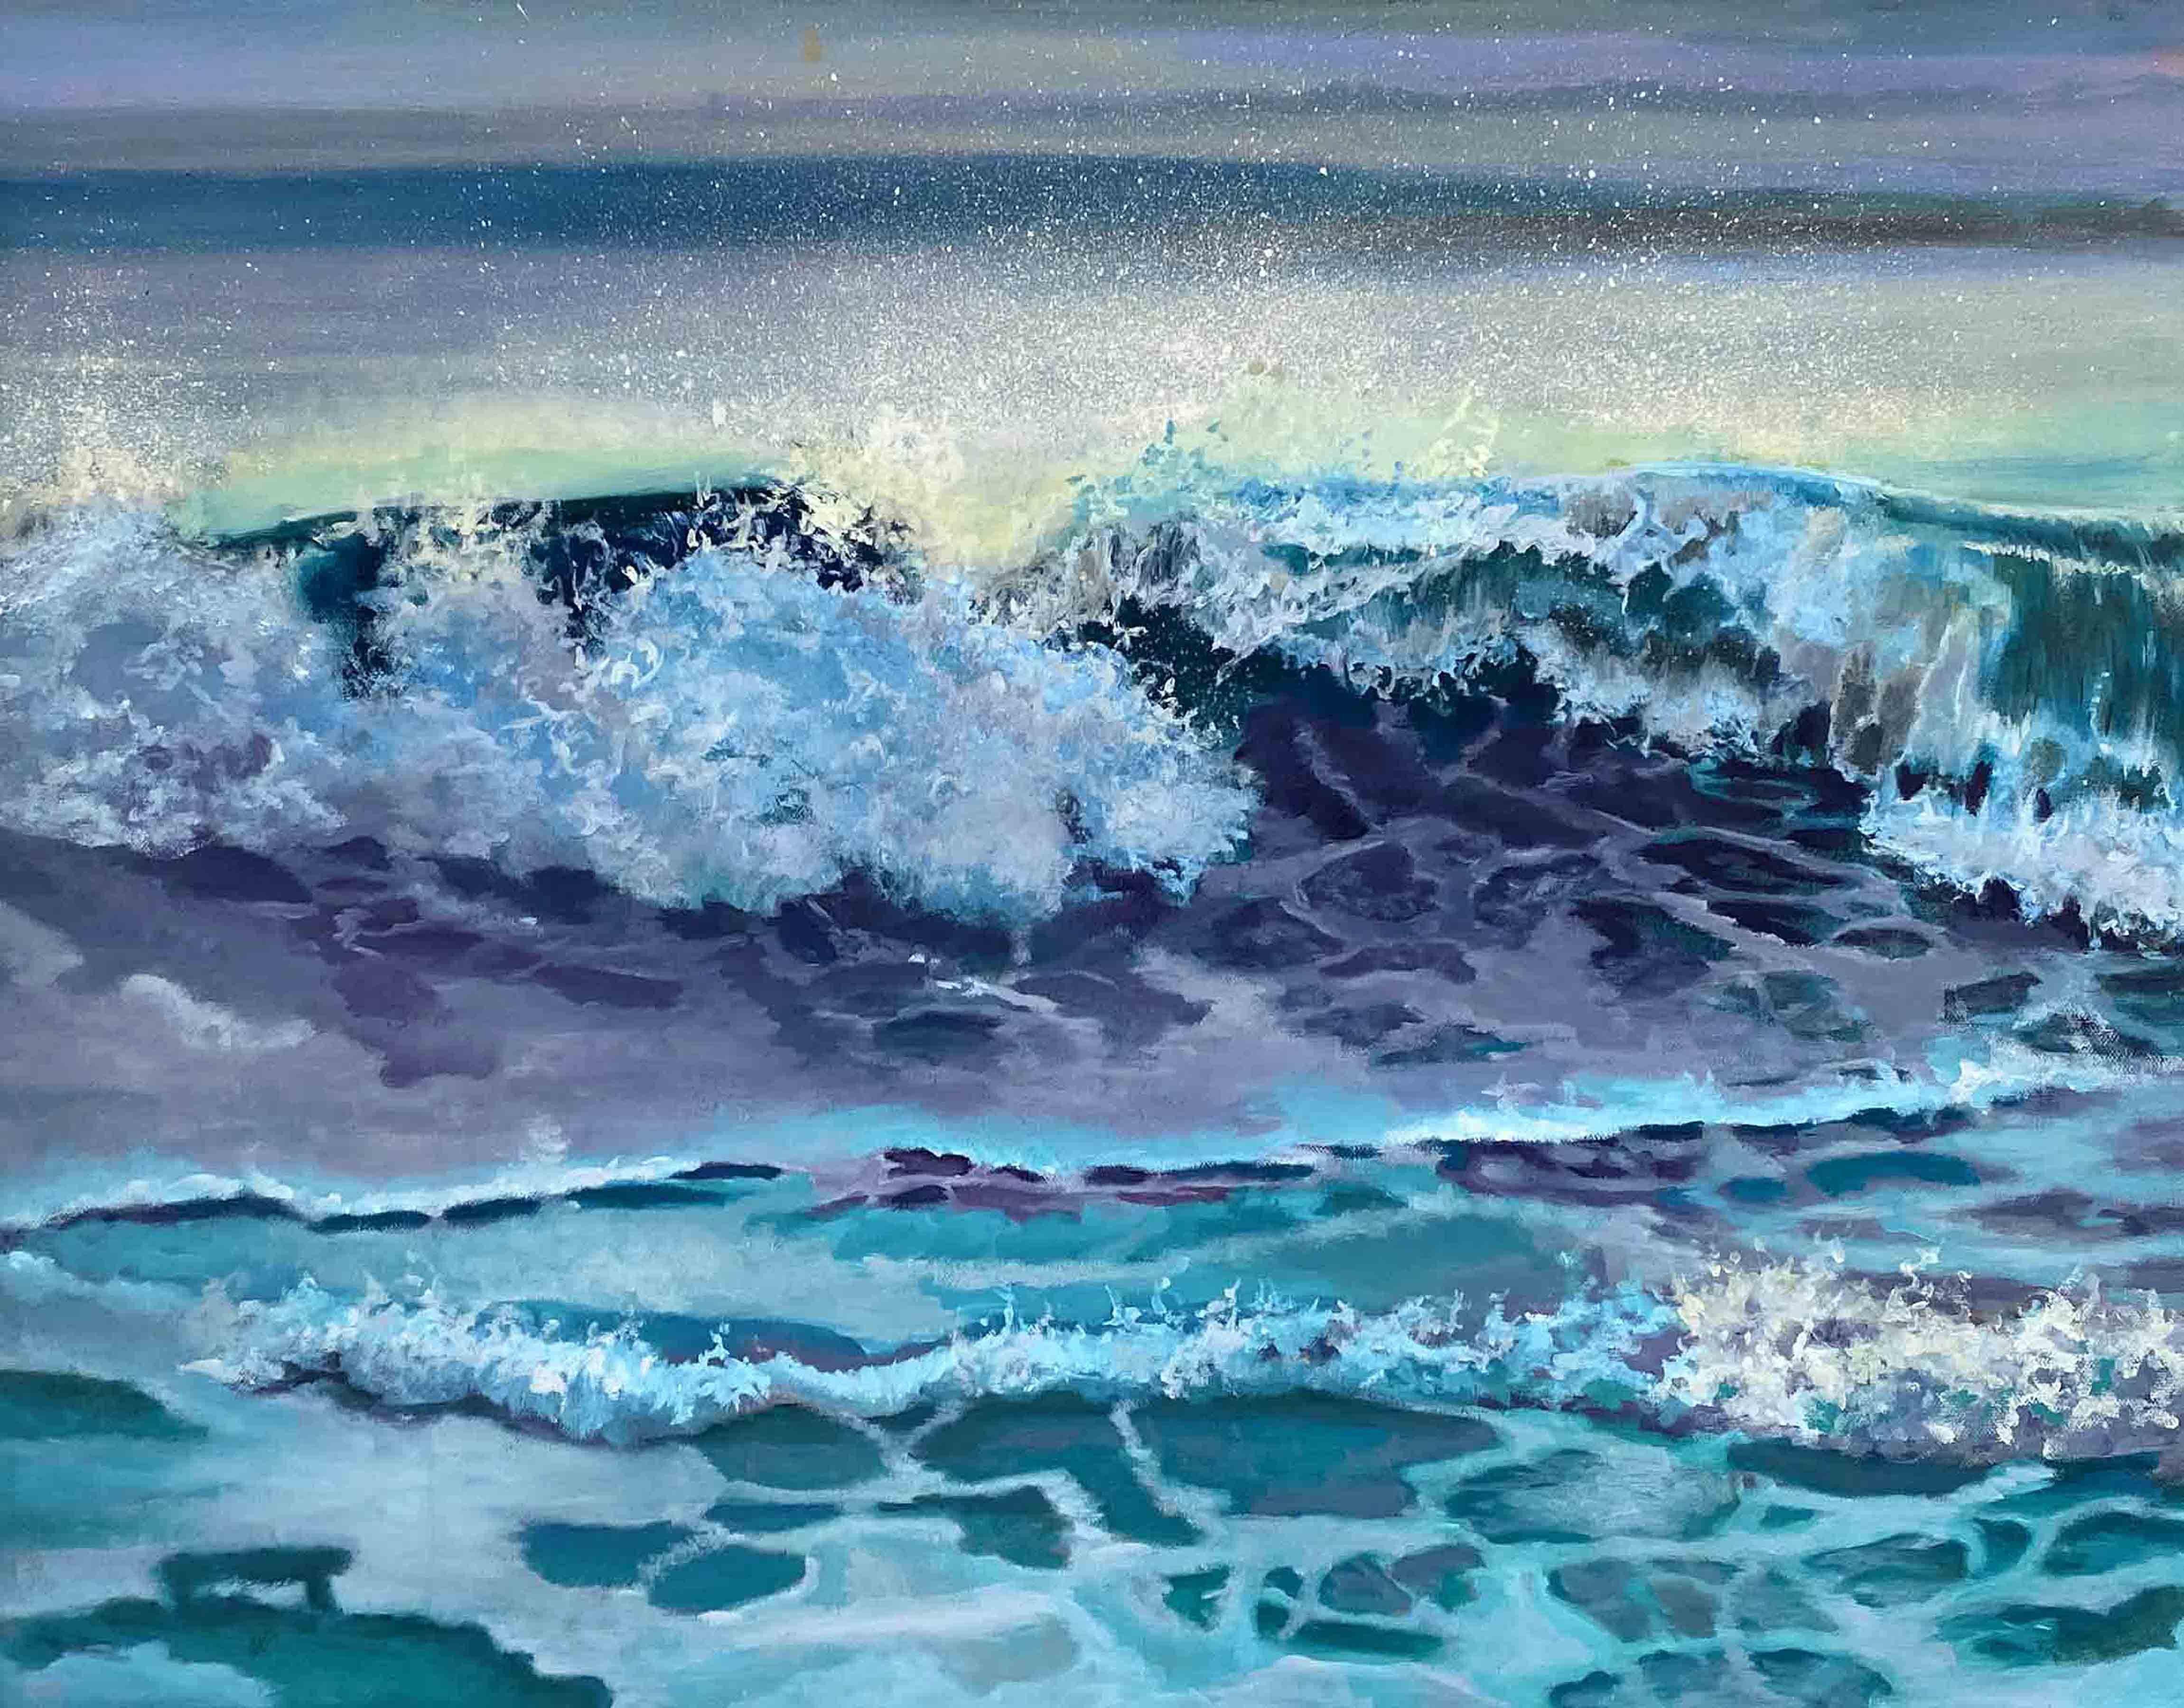 2023 - Oil on Gallery Wrapped Canvas â€“24H x 30 W x 1.5 Inches and ready to hang  Pura Vida Wave is a stunning painting by celebrated artist Dennis Crayon that captures the natural beauty of Costa Rica's stunning beaches and crystal blue green